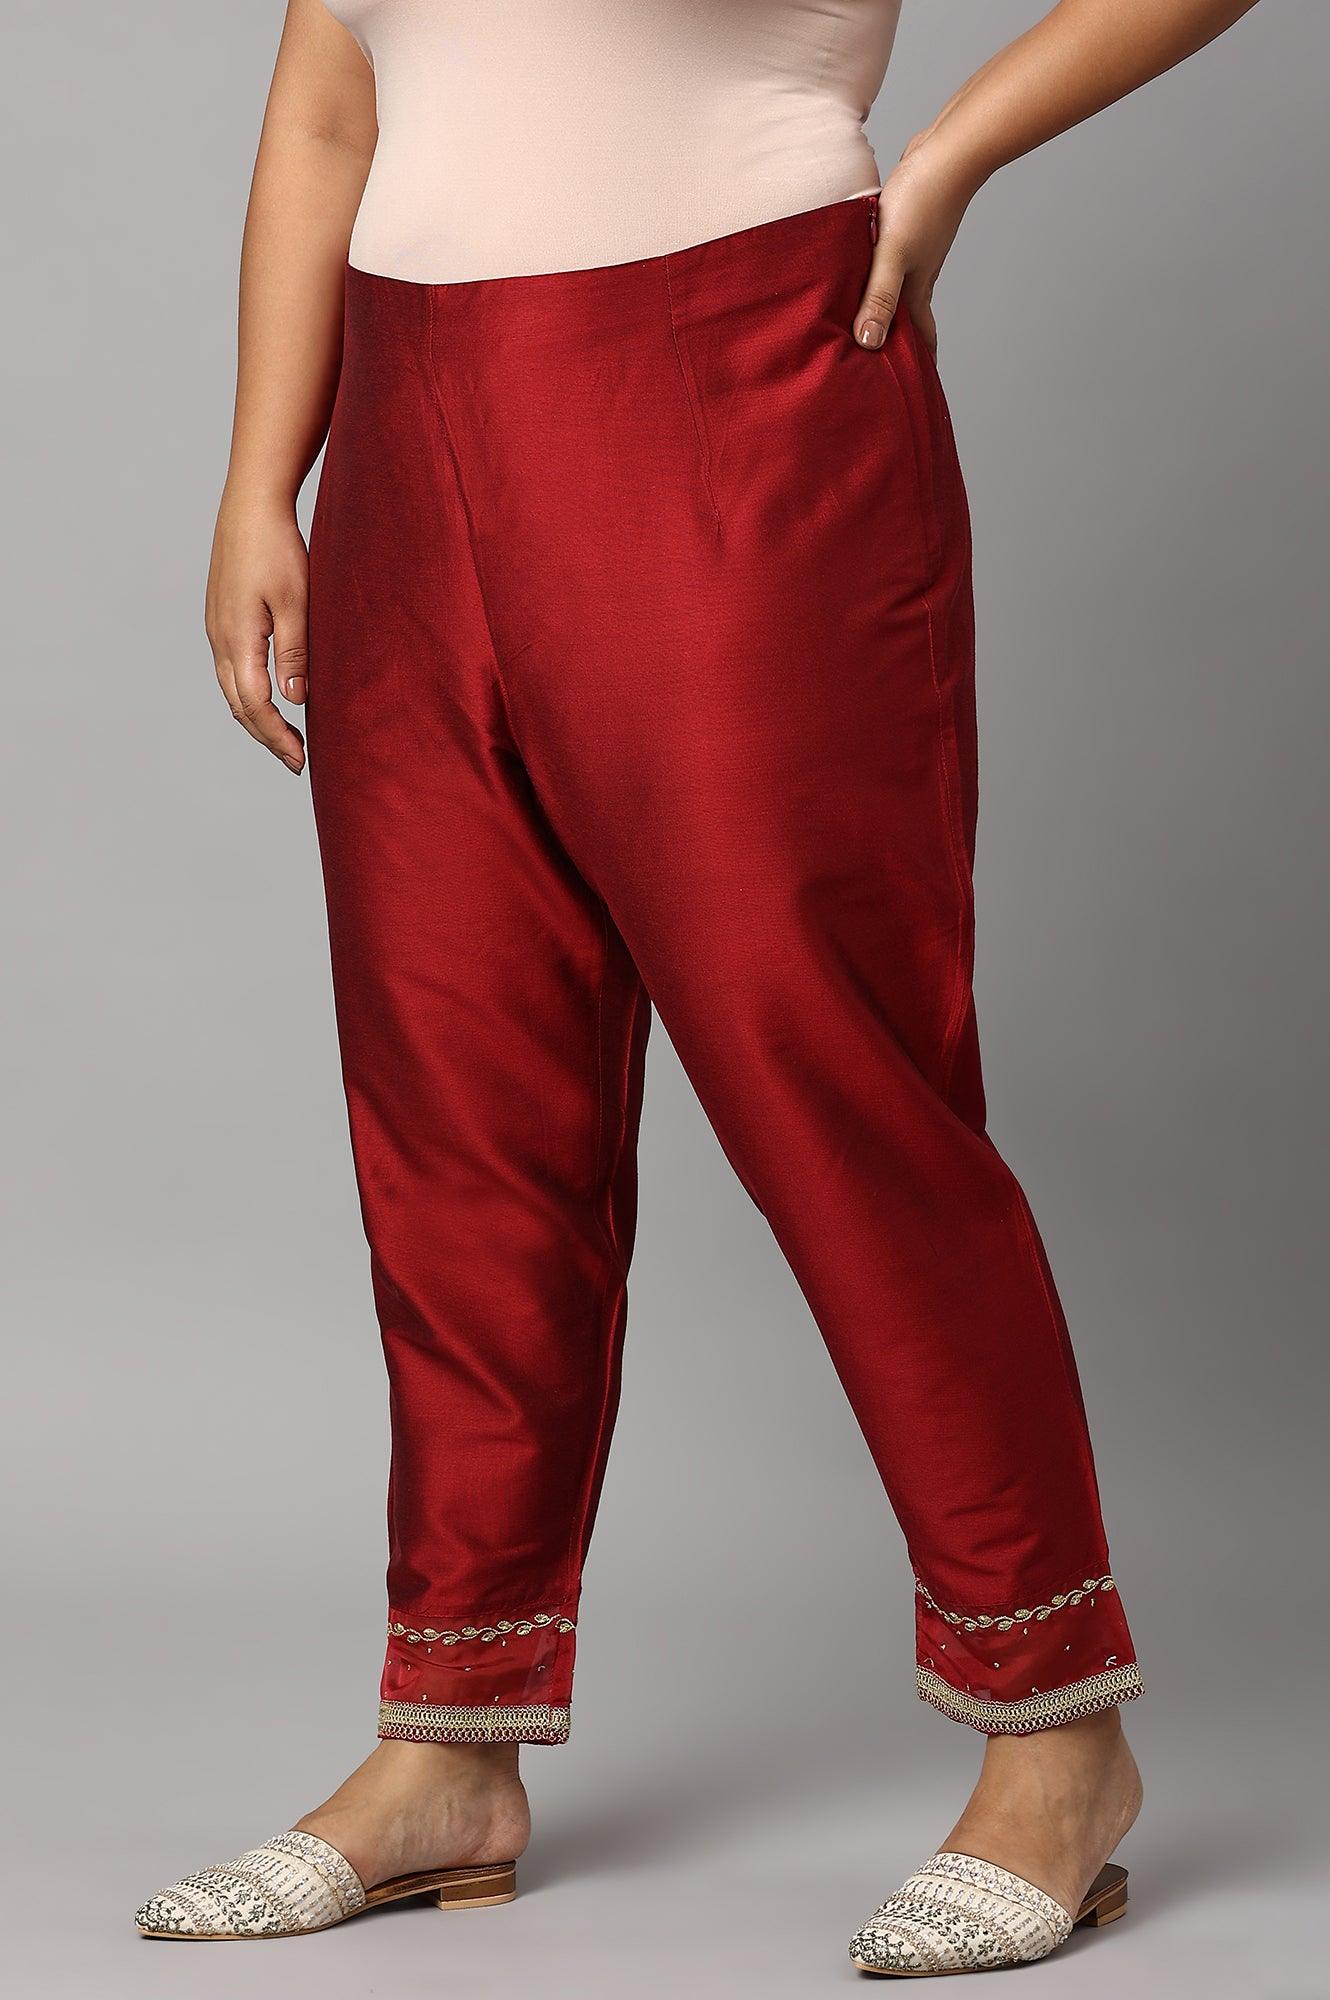 Red Embroidered Light Festive Plus Size Slim Pants - wforwoman